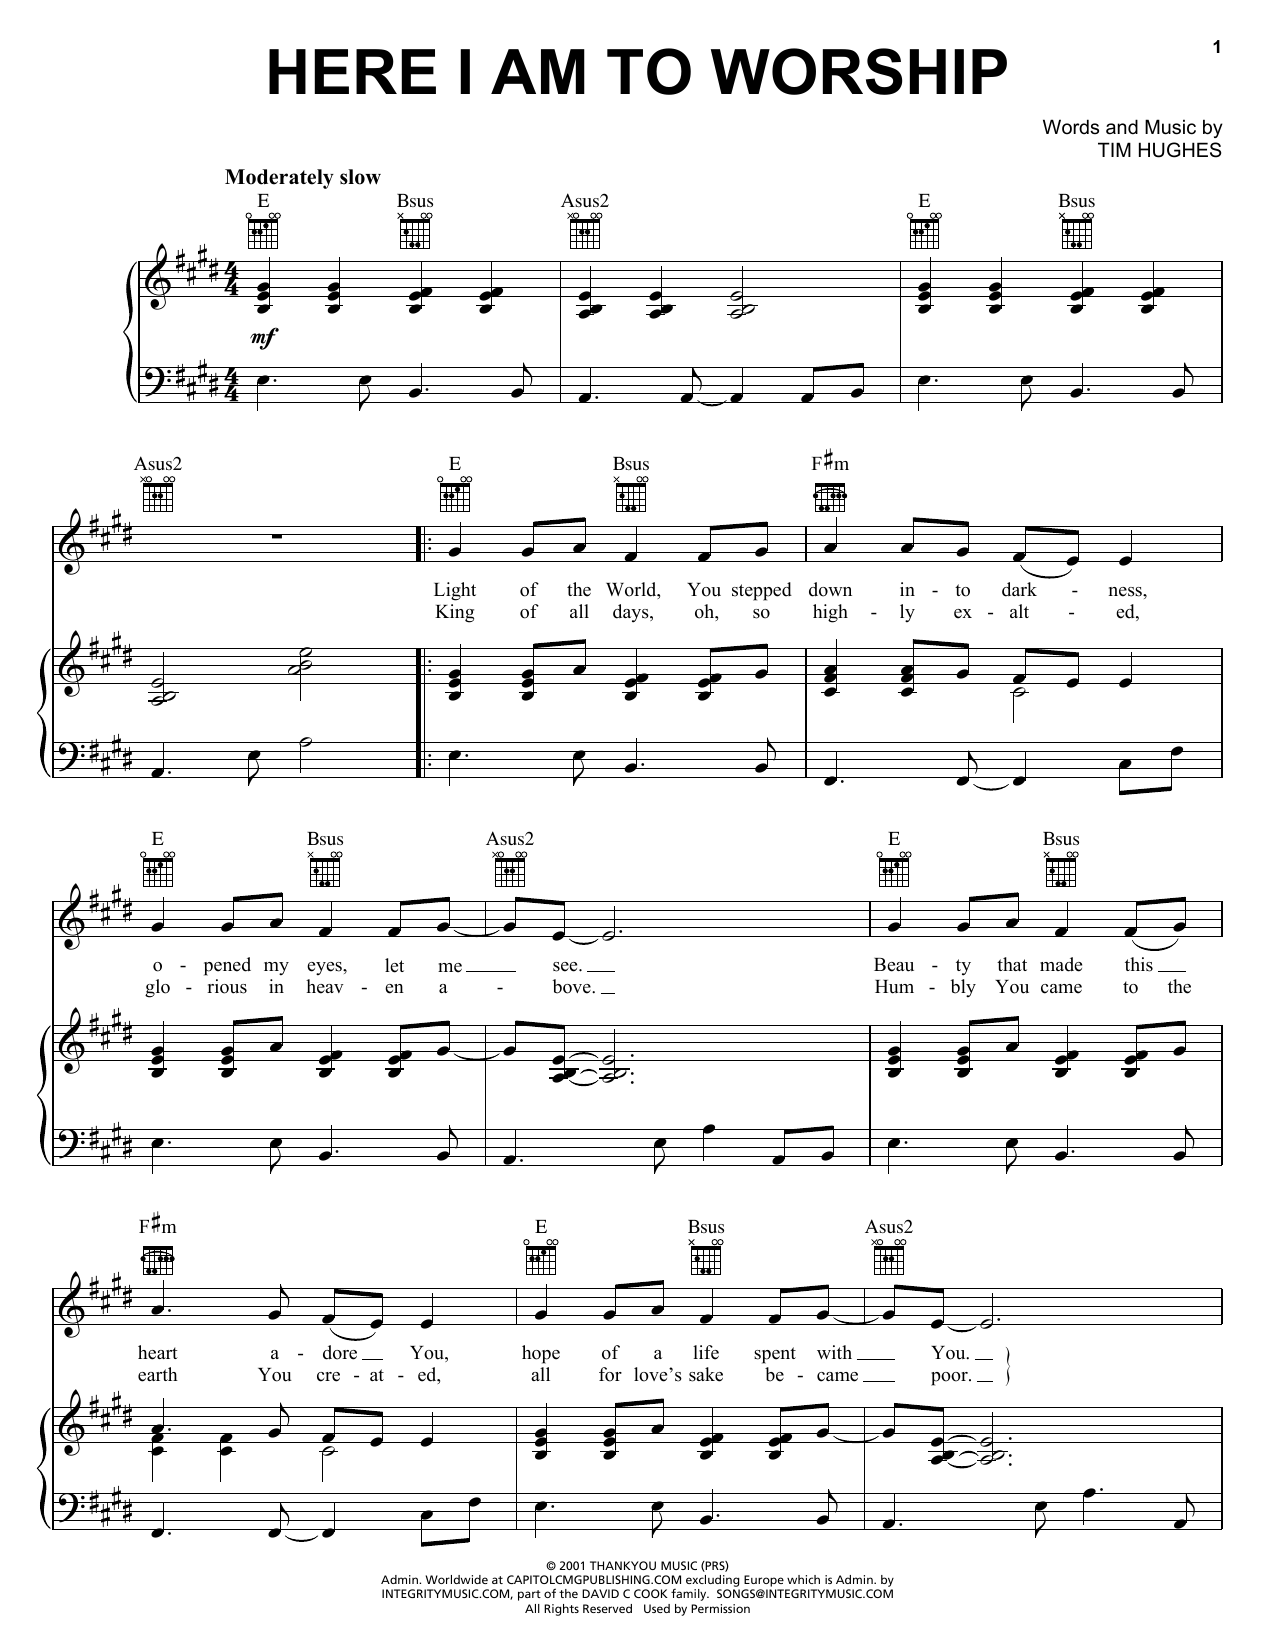 tim-hughes-here-i-am-to-worship-sheet-music-notes-download